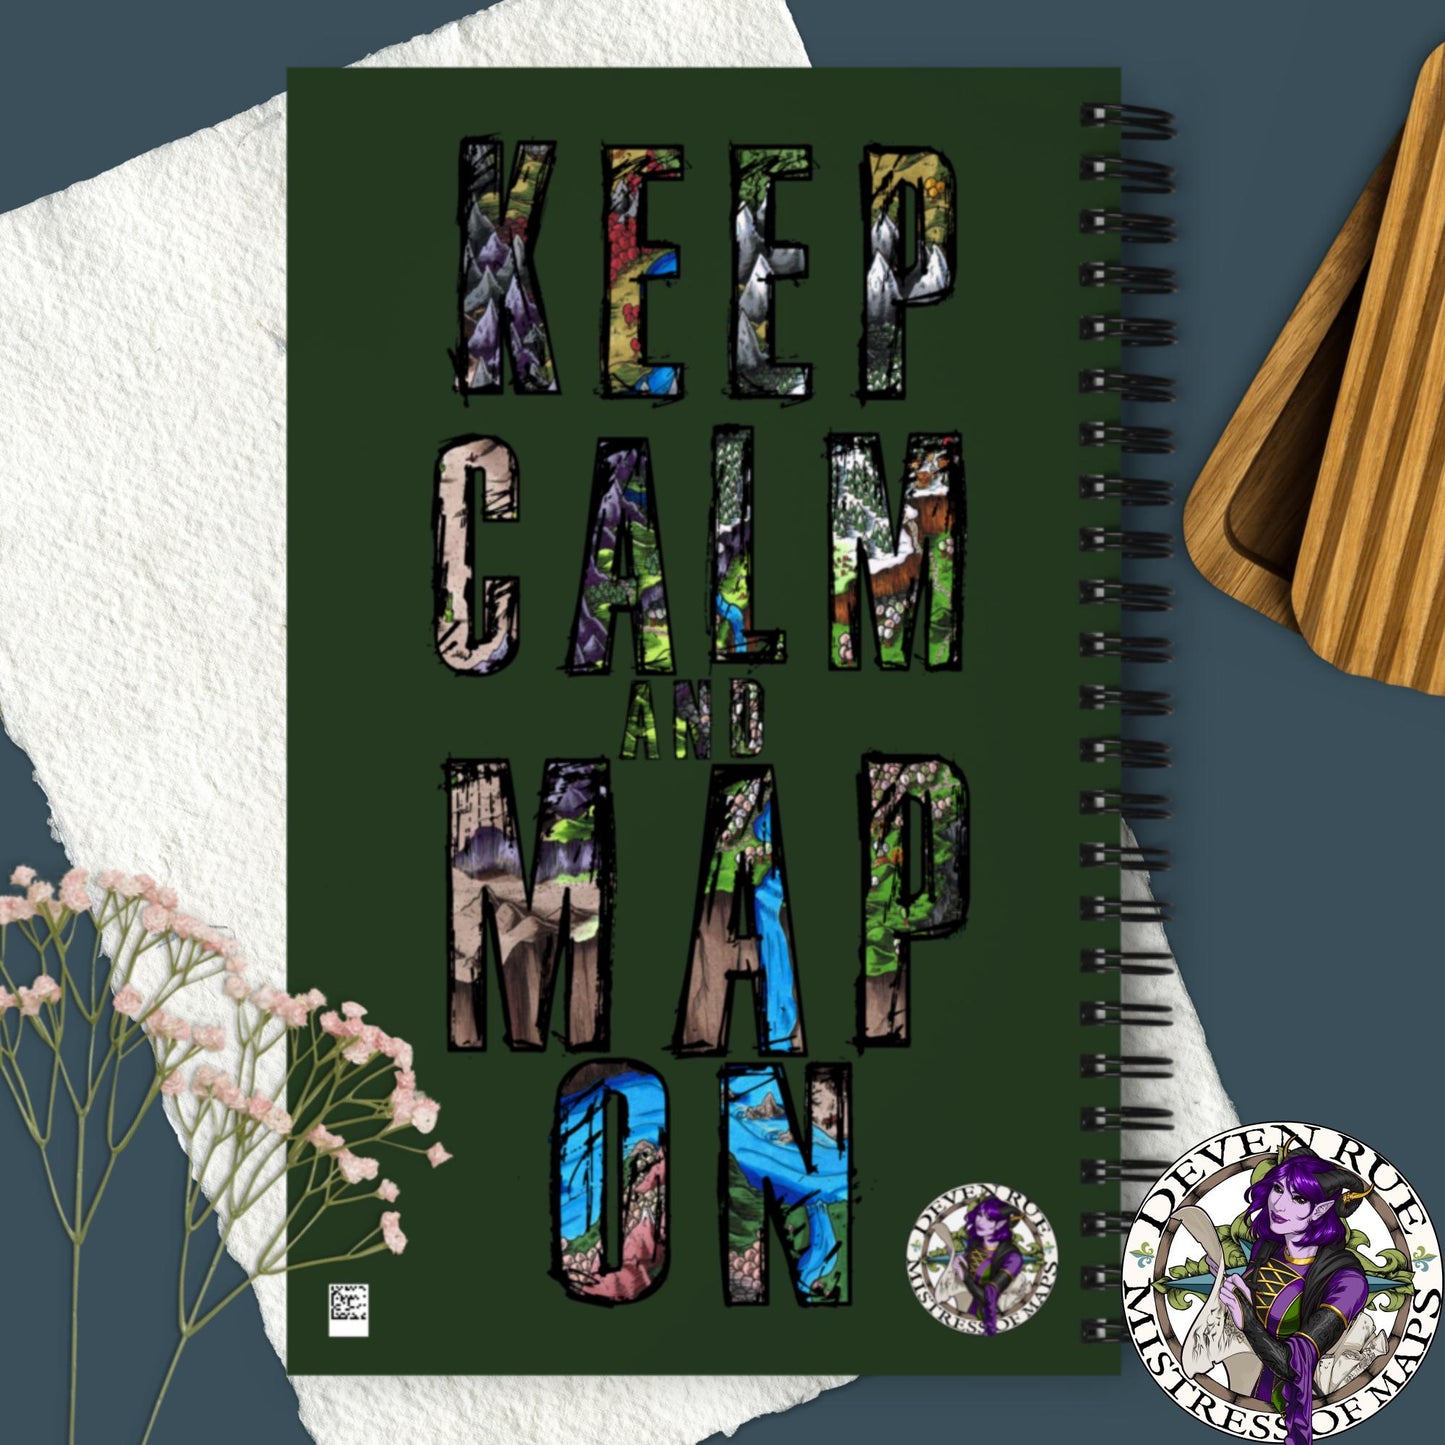 The back of the Keep Calm and Map on notebook with Deven Rue's logo.